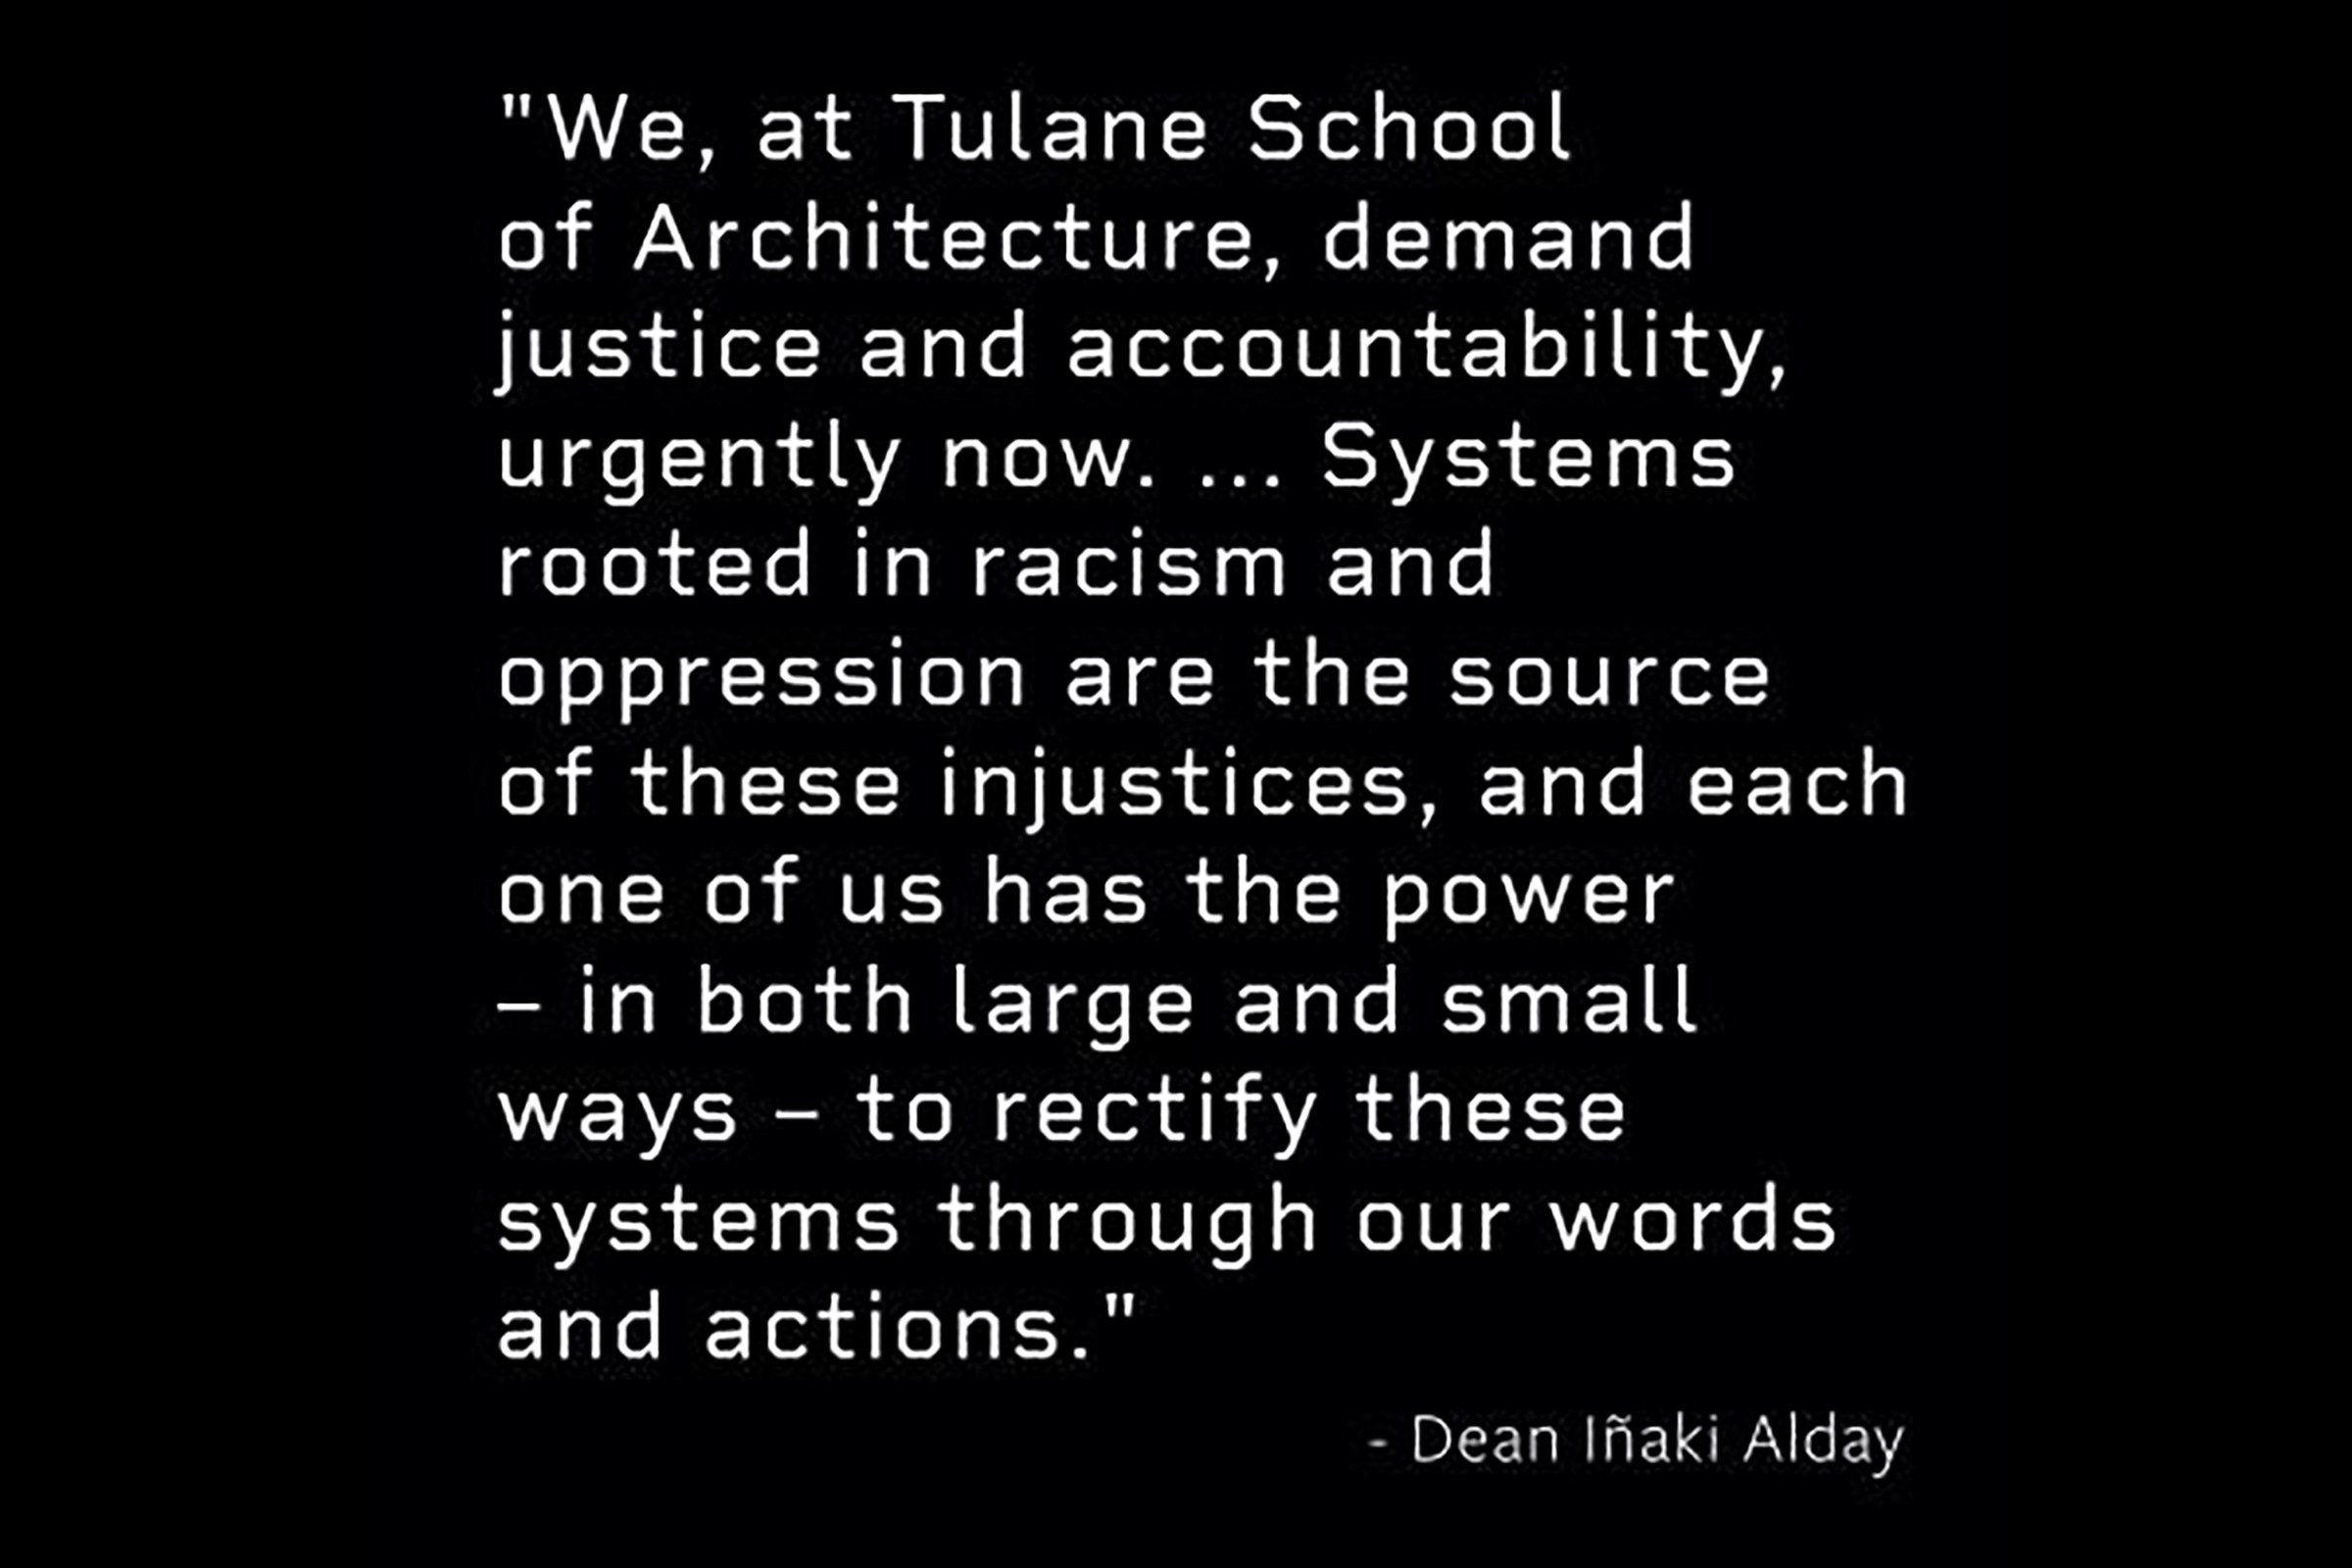 Quote by Dean Alday demanding justice and accountability in the wake of the black lives matter movement 